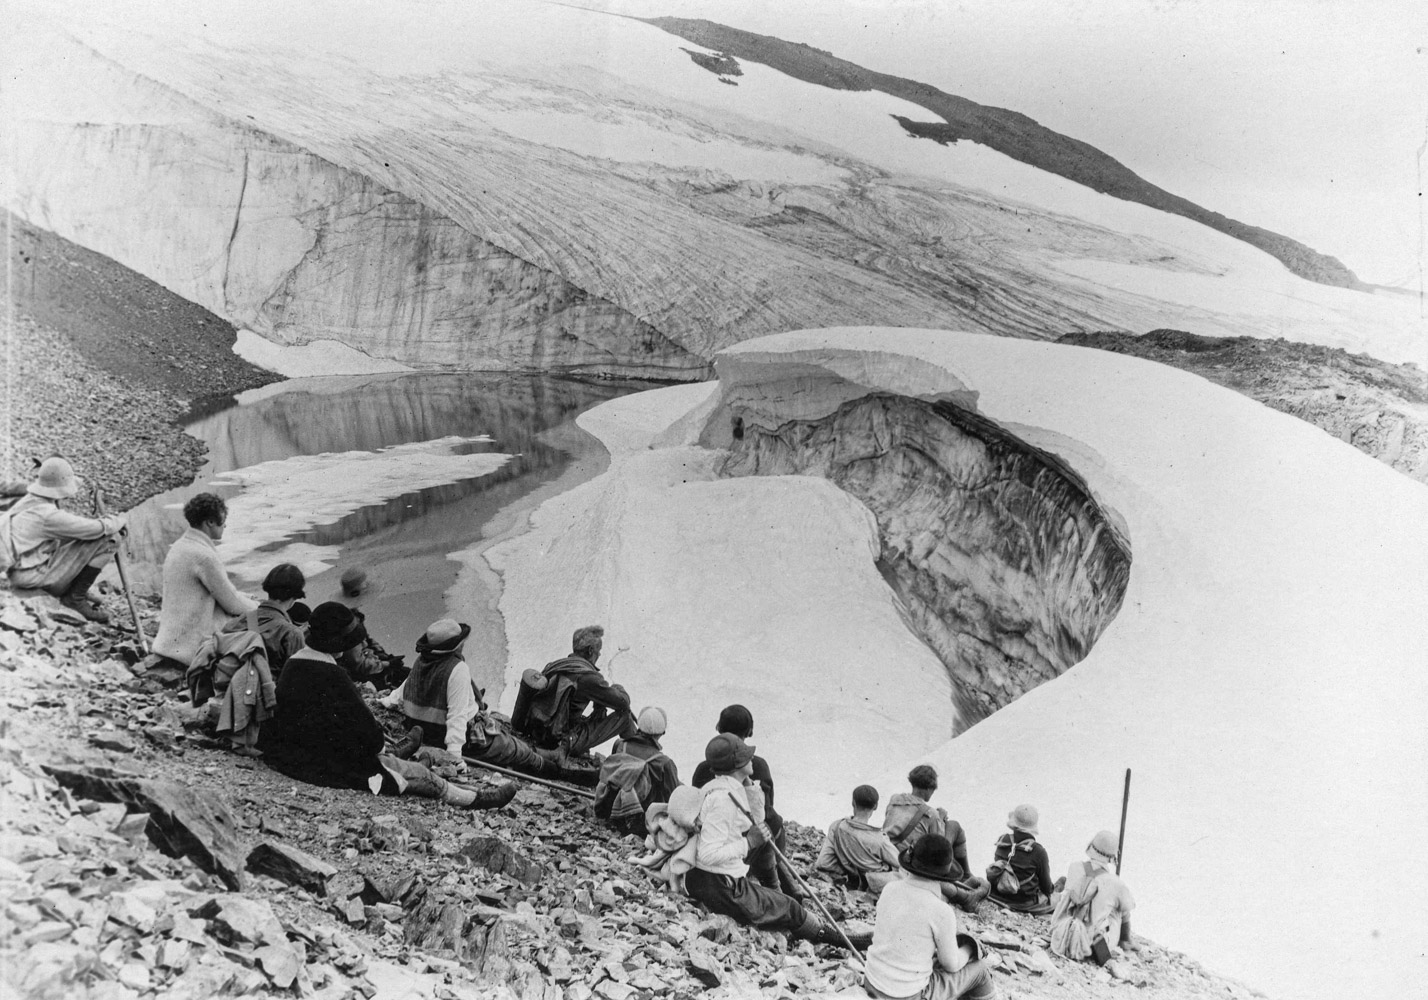 1920? - A group of hikers resting beside a glacier